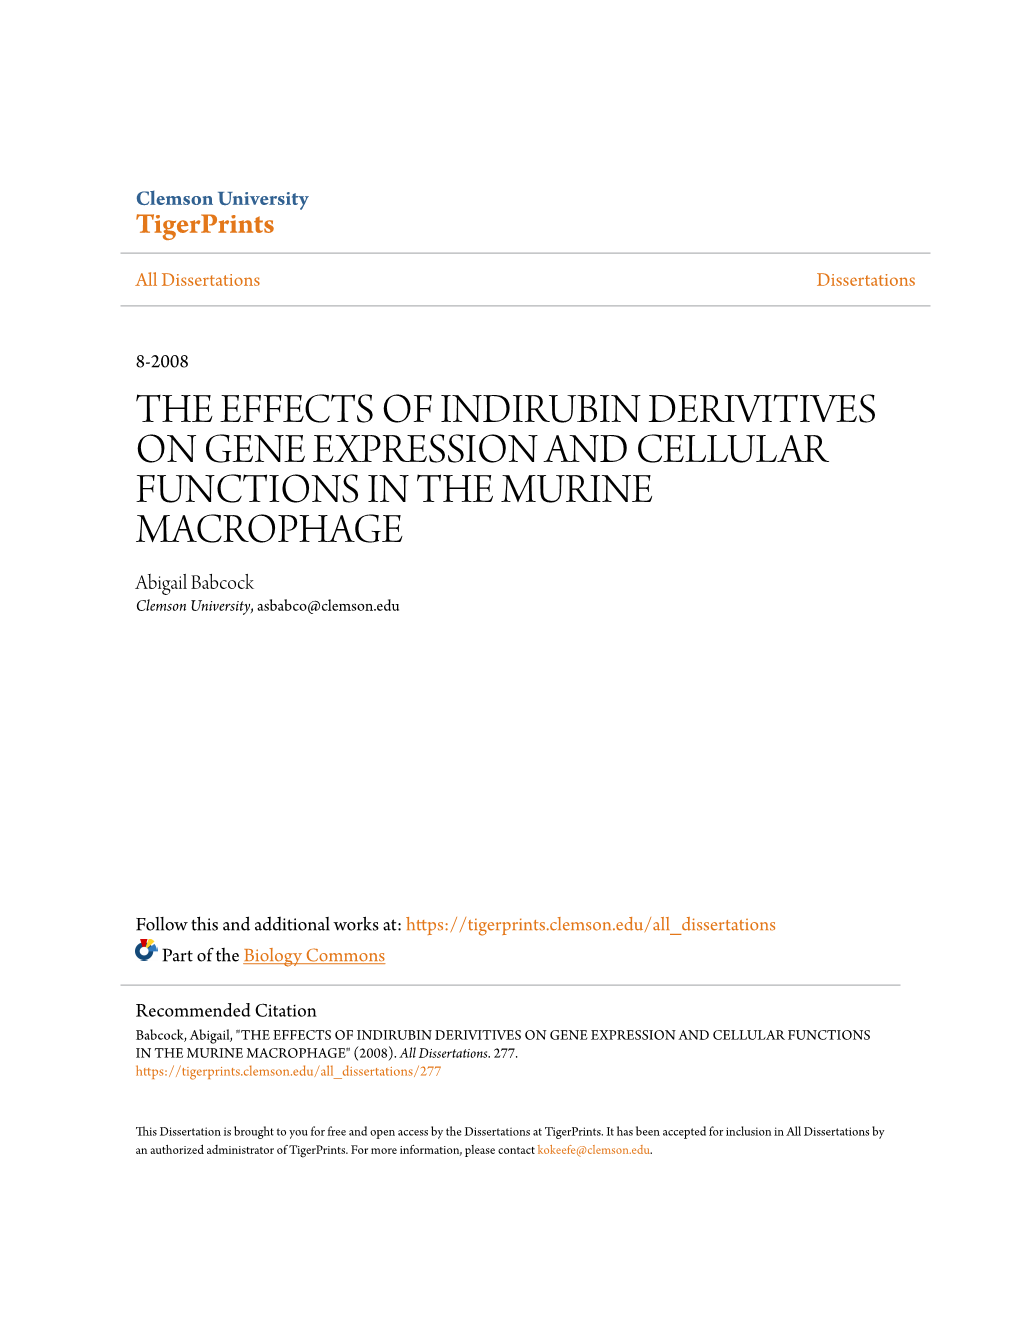 THE EFFECTS of INDIRUBIN DERIVITIVES on GENE EXPRESSION and CELLULAR FUNCTIONS in the MURINE MACROPHAGE Abigail Babcock Clemson University, Asbabco@Clemson.Edu